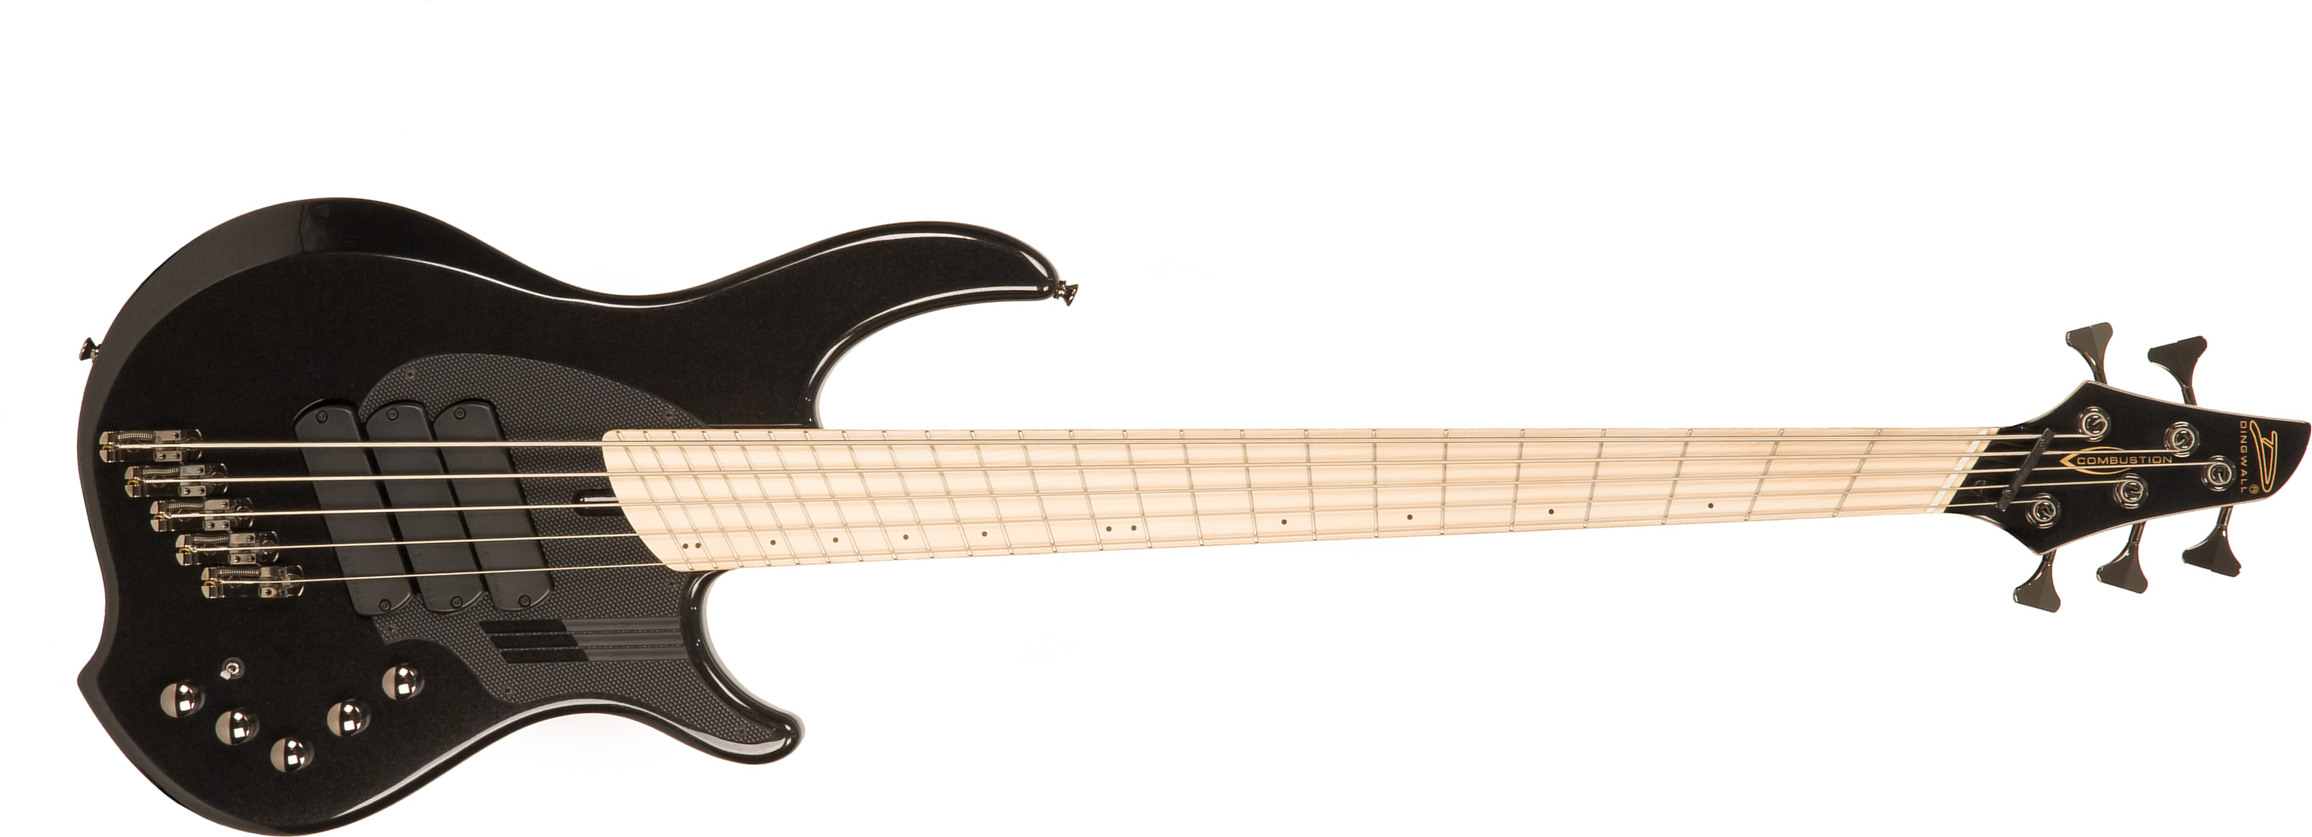 Dingwall Adam Nolly Getgood Ng3 5c Signature 3pu Active Mn - Metallic Black - Solid body electric bass - Main picture